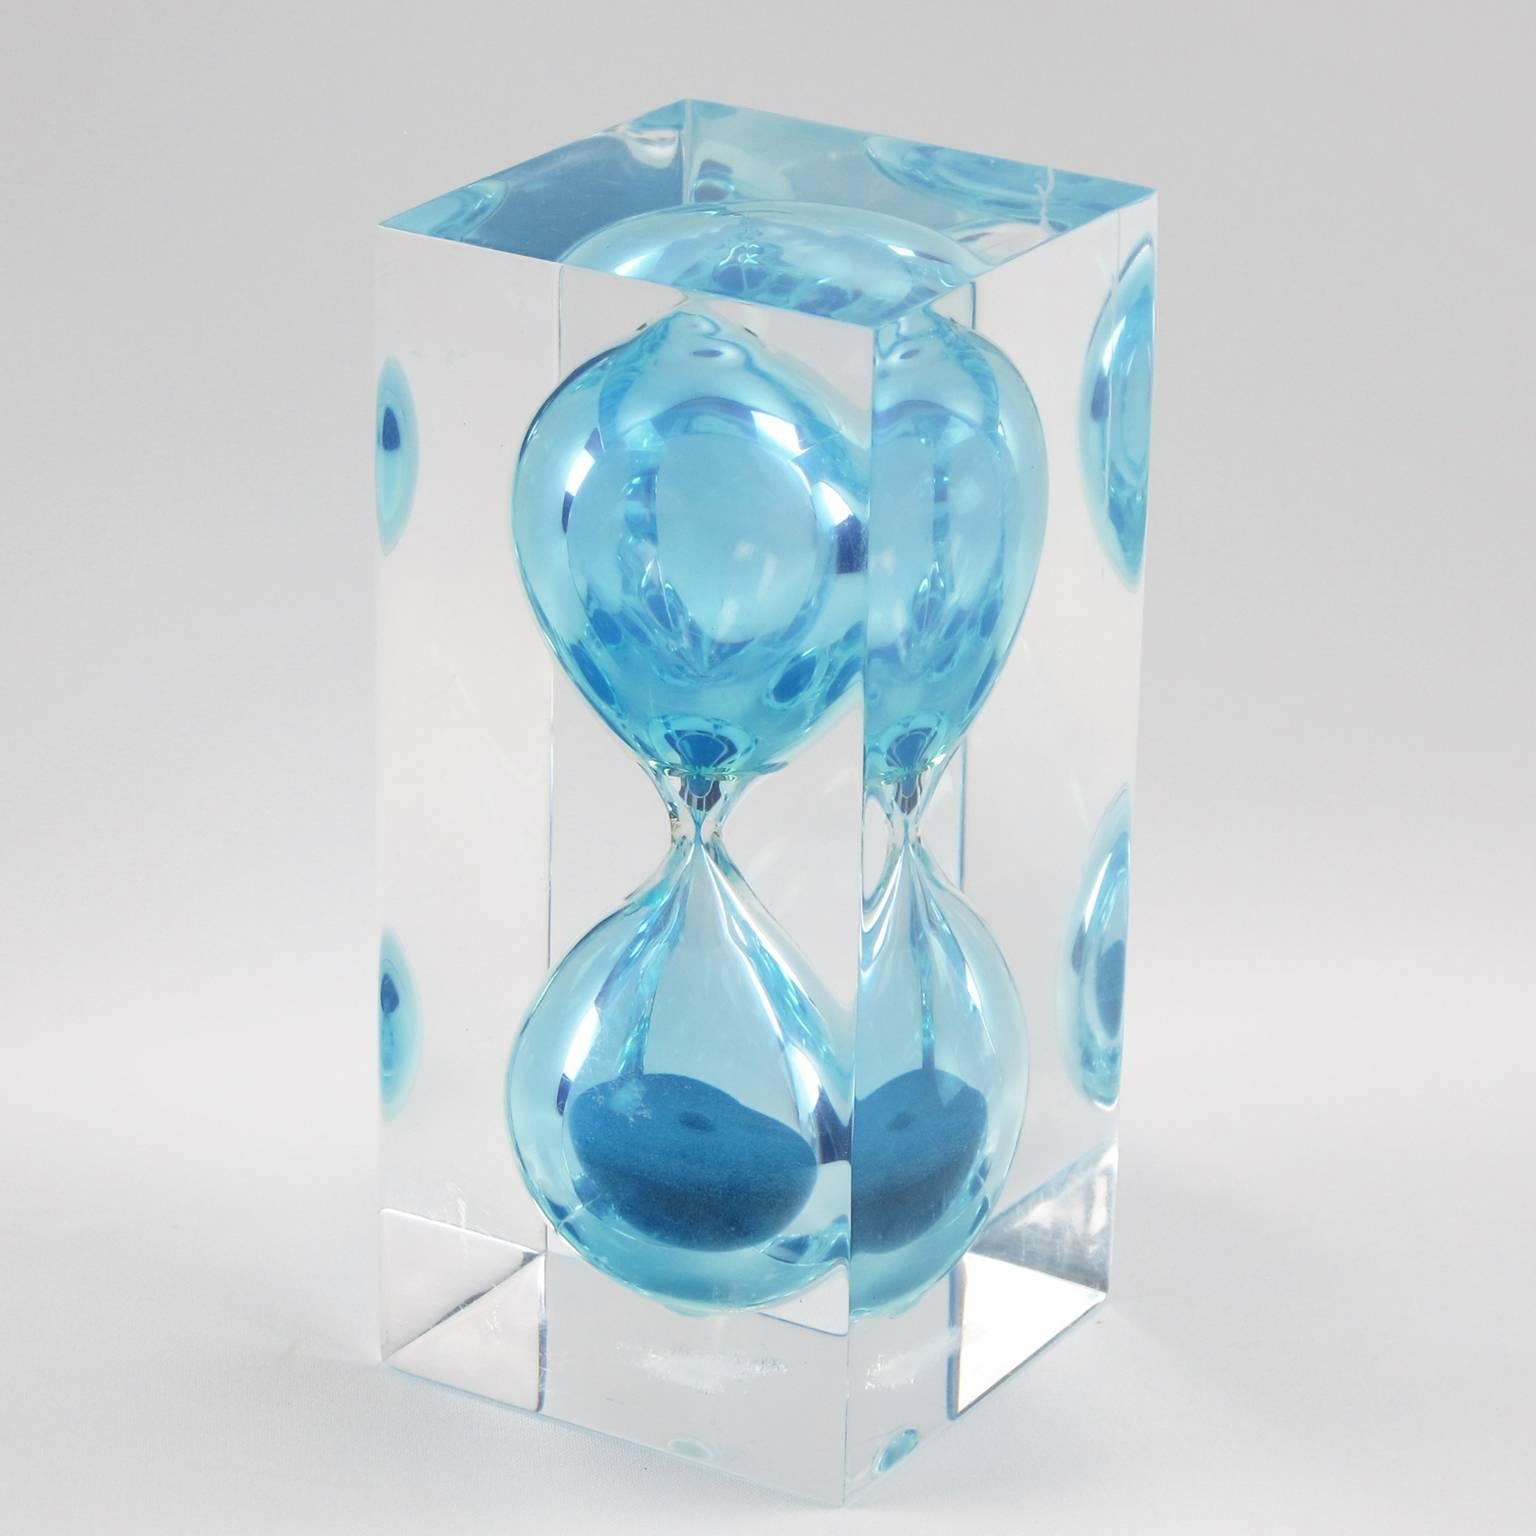 Elegant vintage 1970s Lucite Hourglass with amazing blue colored sand.
Tall size with crystal clear Lucite in geometric shape. Excellent working condition.

Measurements: 3.12 in. wide (8 cm) x 3.12 in. deep (8 cm) x 6.75 in. high (17 cm).
 